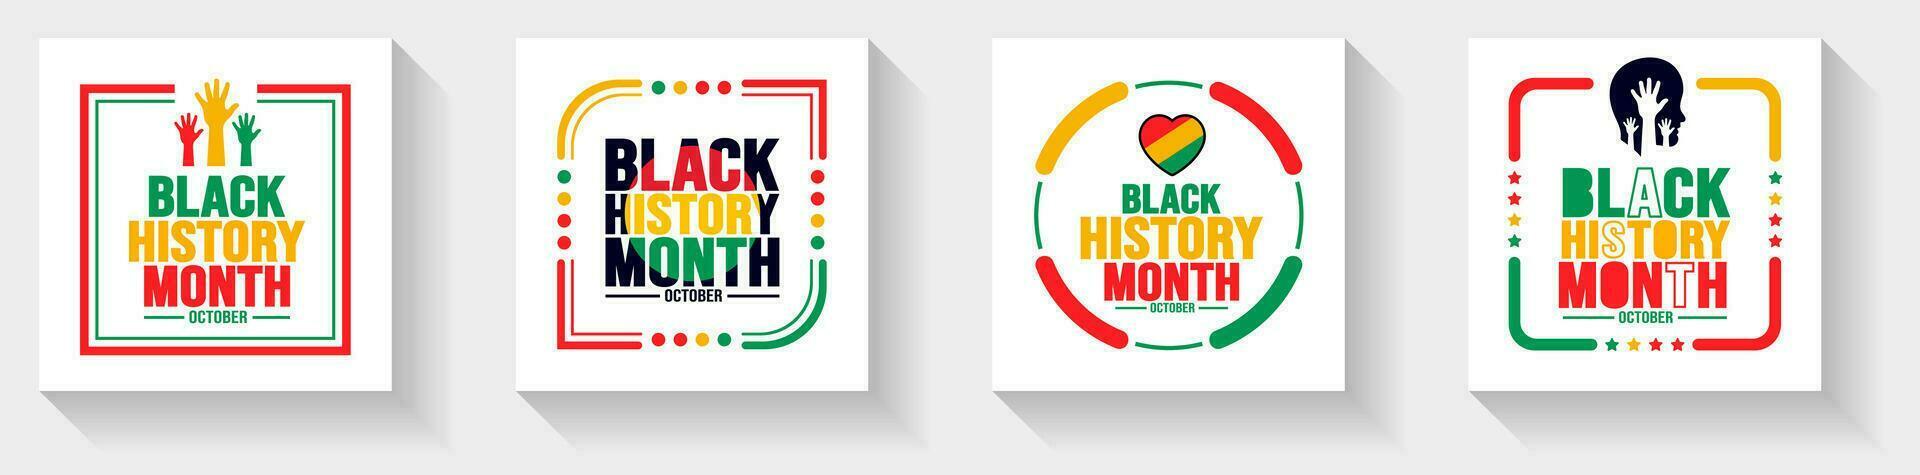 Black History Month Social media post banner, sticker, typography template set Celebrated in October and February United States, Canada, Africa, UK, Ireland. use to cover, banner, placard, poster. vector